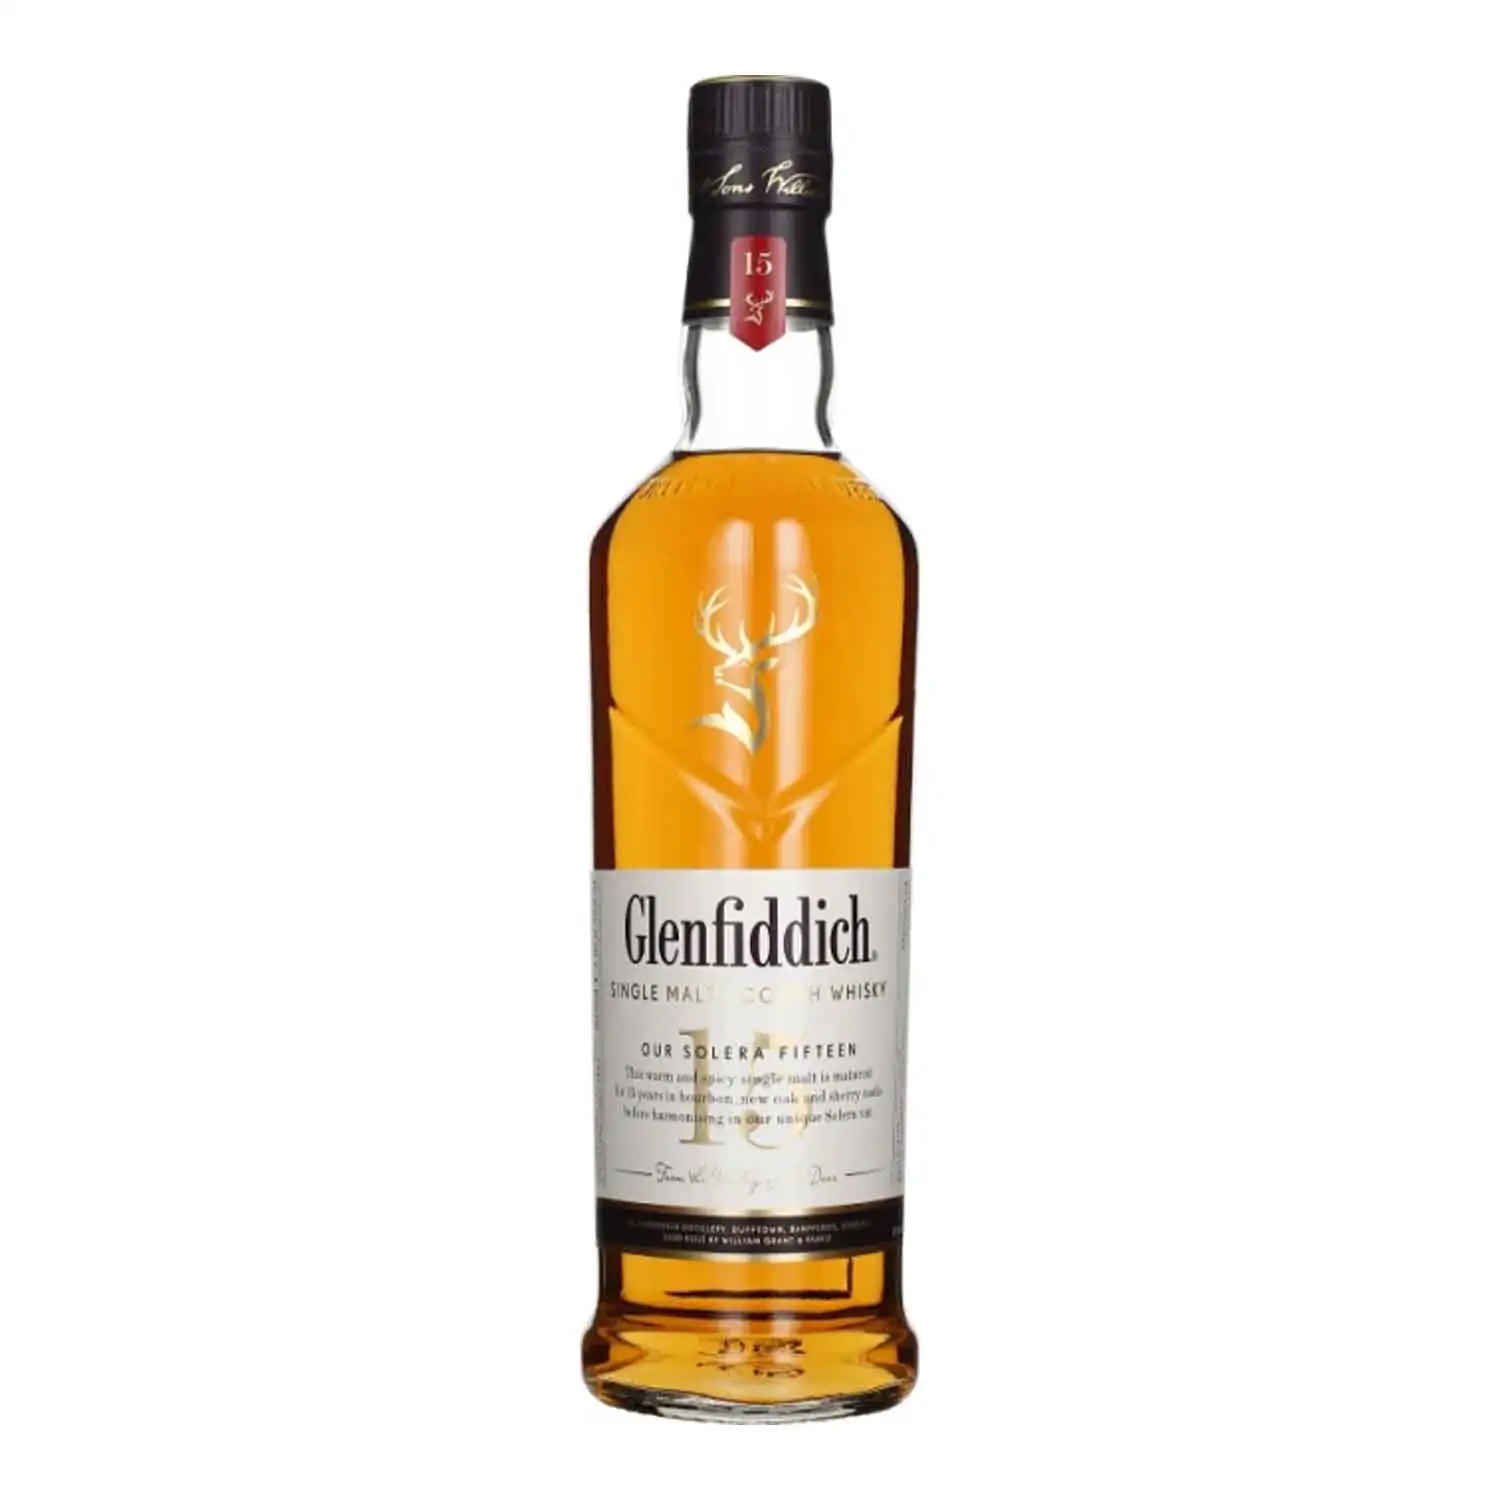 Glenfiddich 15 70cl Alc 40% - Buy at Real Tobacco